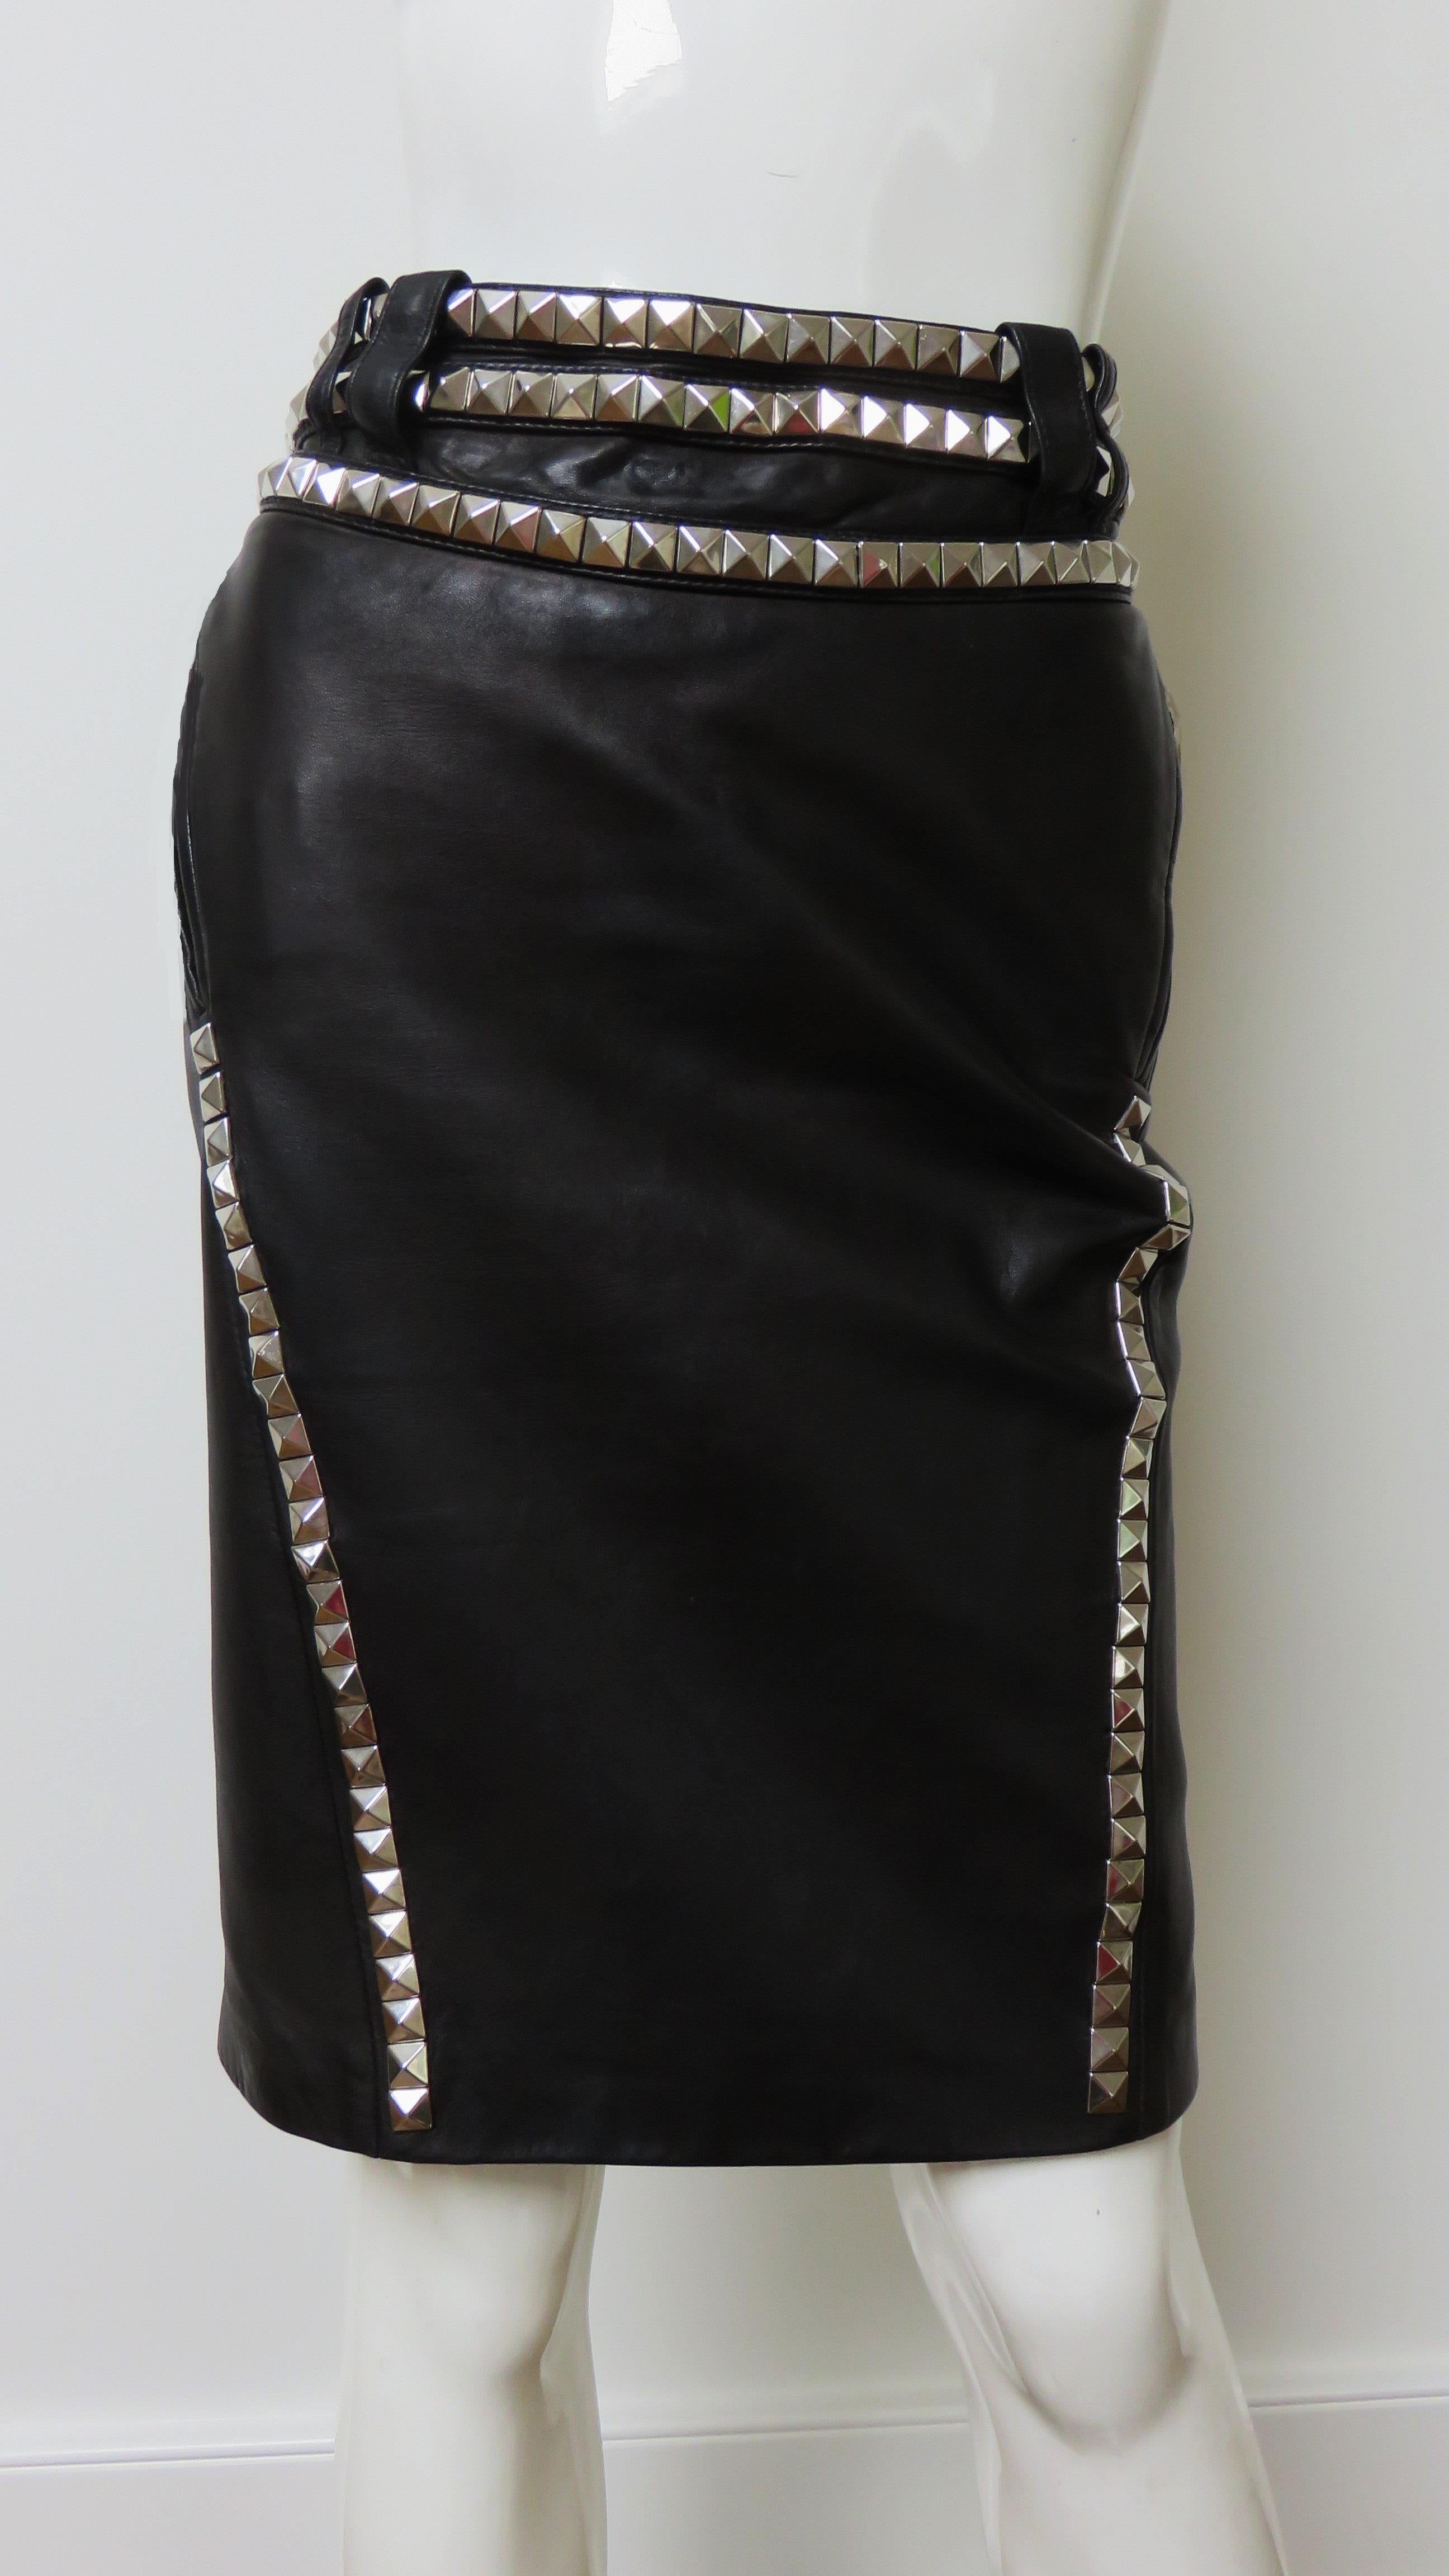 A fabulous black leather skirt from Versace.  It is pencil style with rows of silver metal studs around the waist and along angled front seaming into which zipper pockets at hip level are incorporated. The back of the skirt is comprised of 10